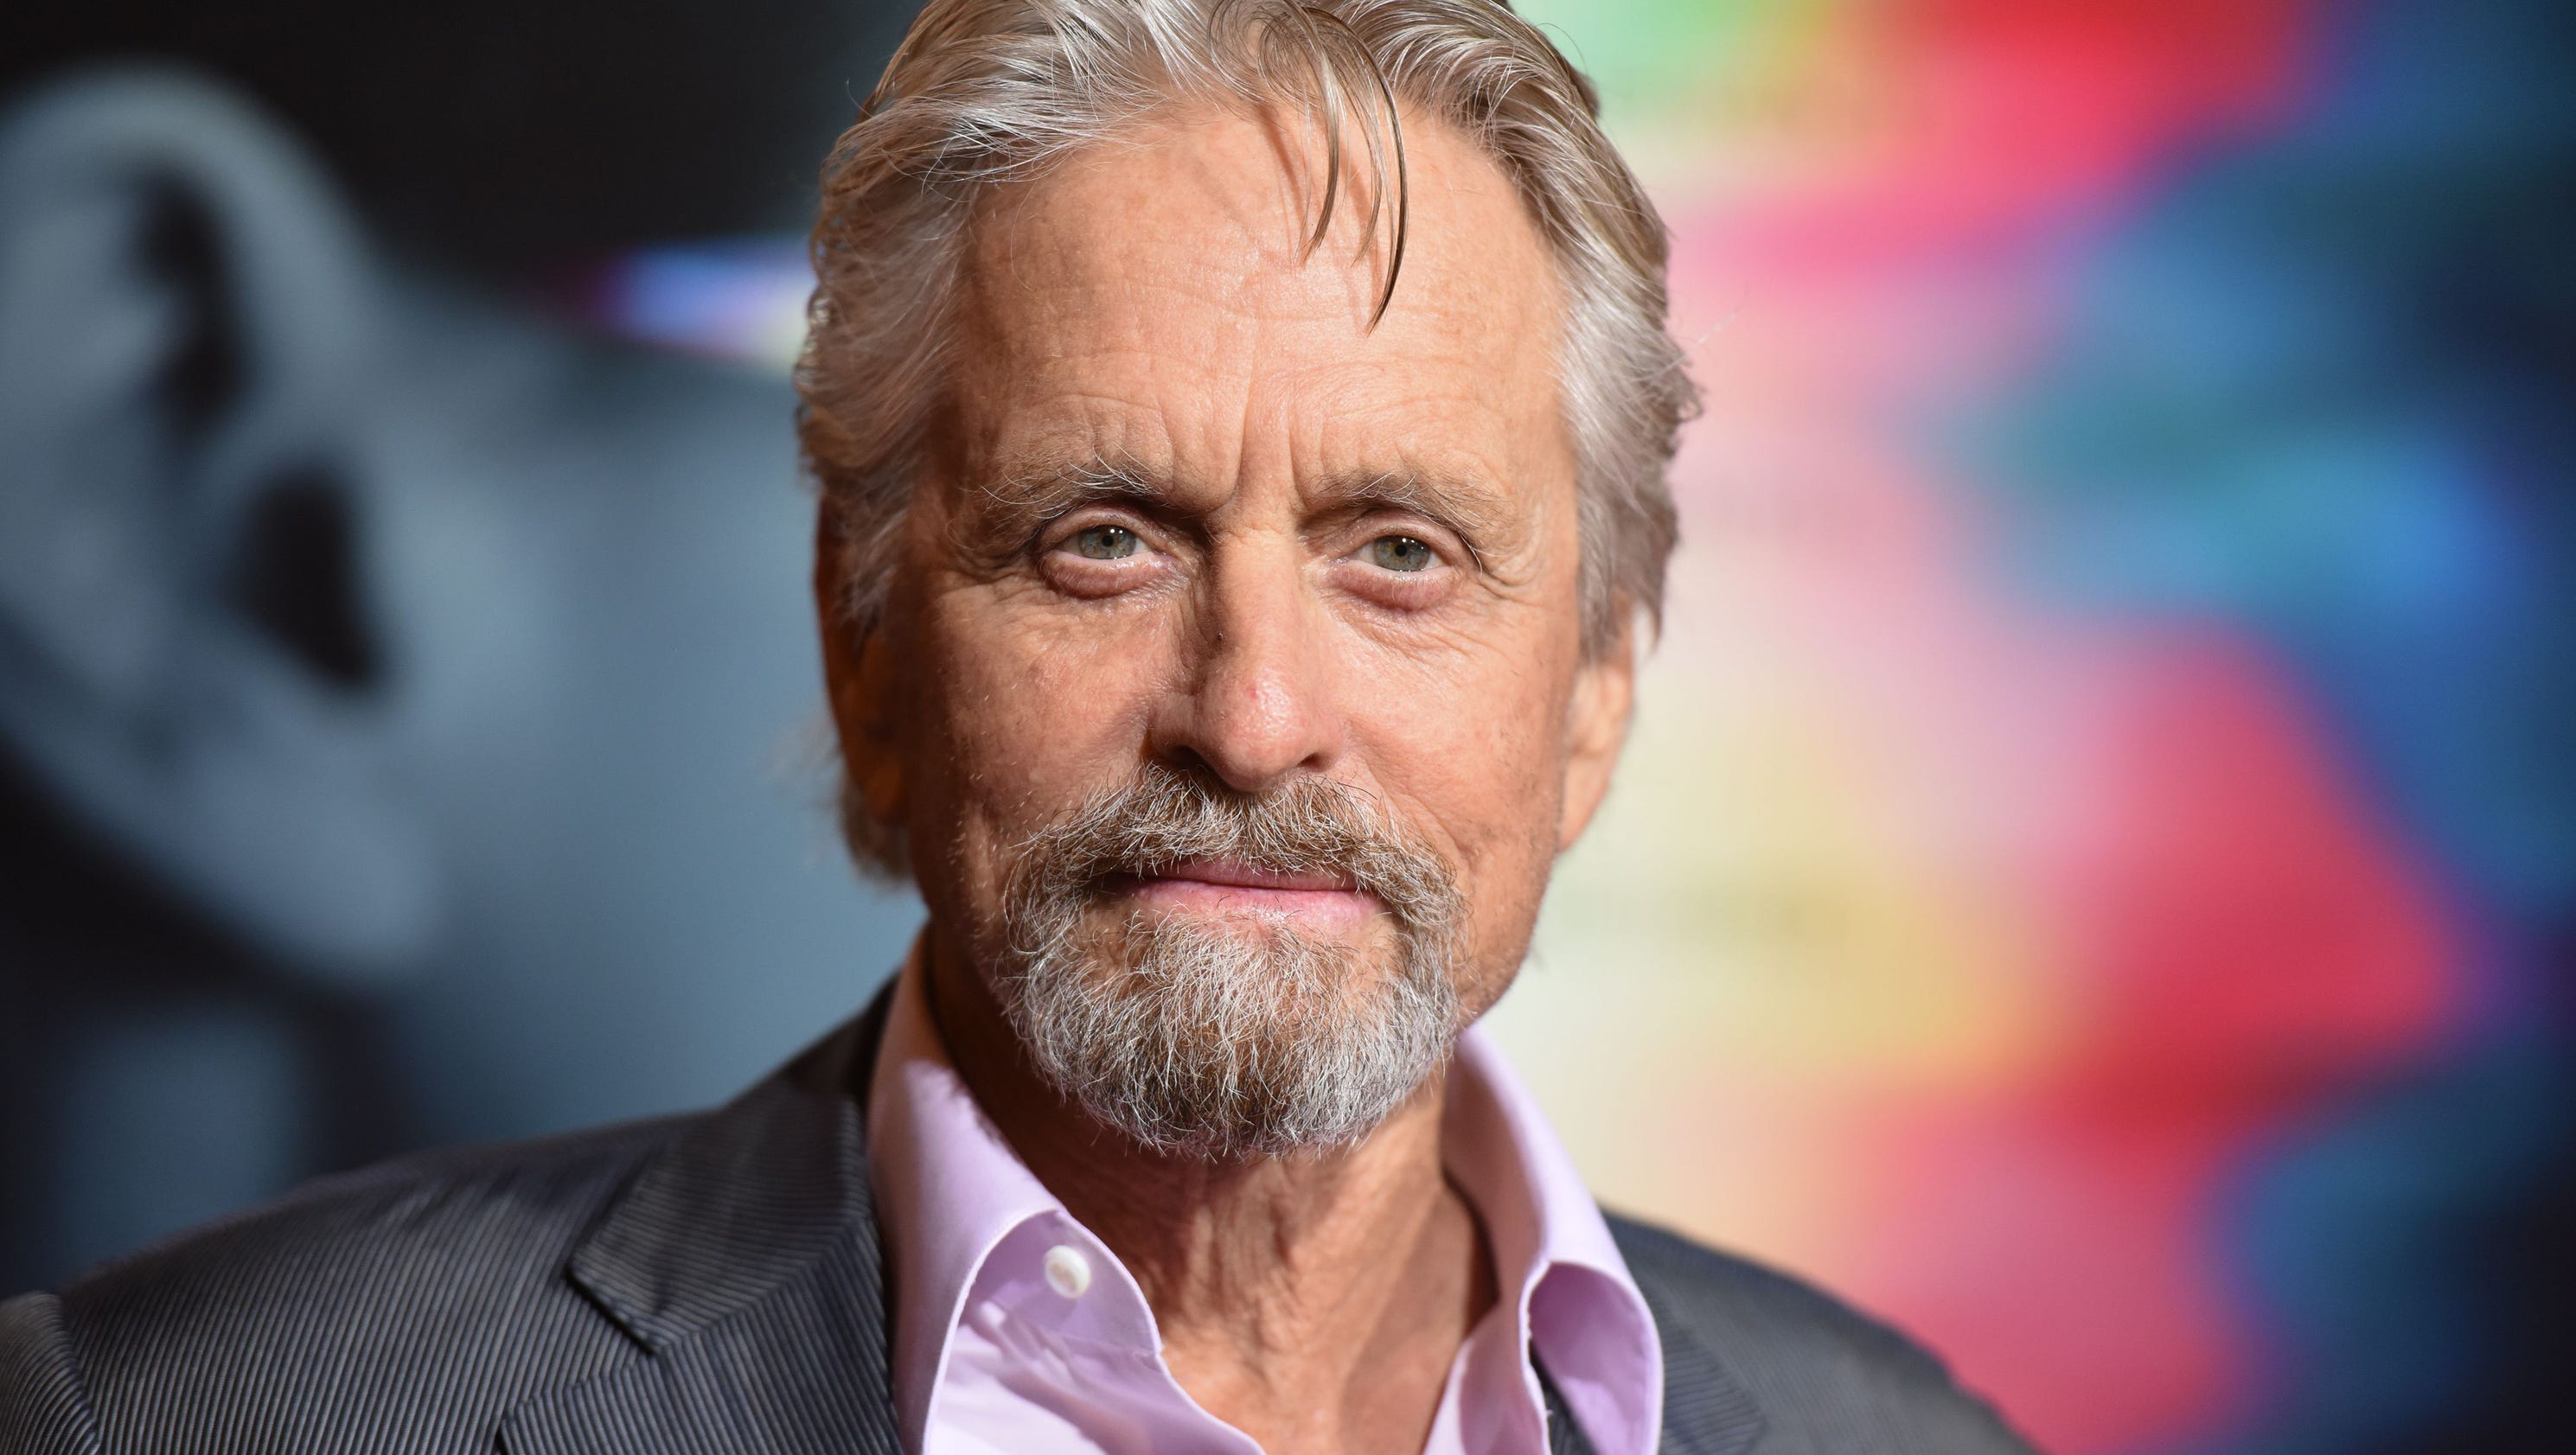 Michael Douglas heard angels singing when he nearly died drowning